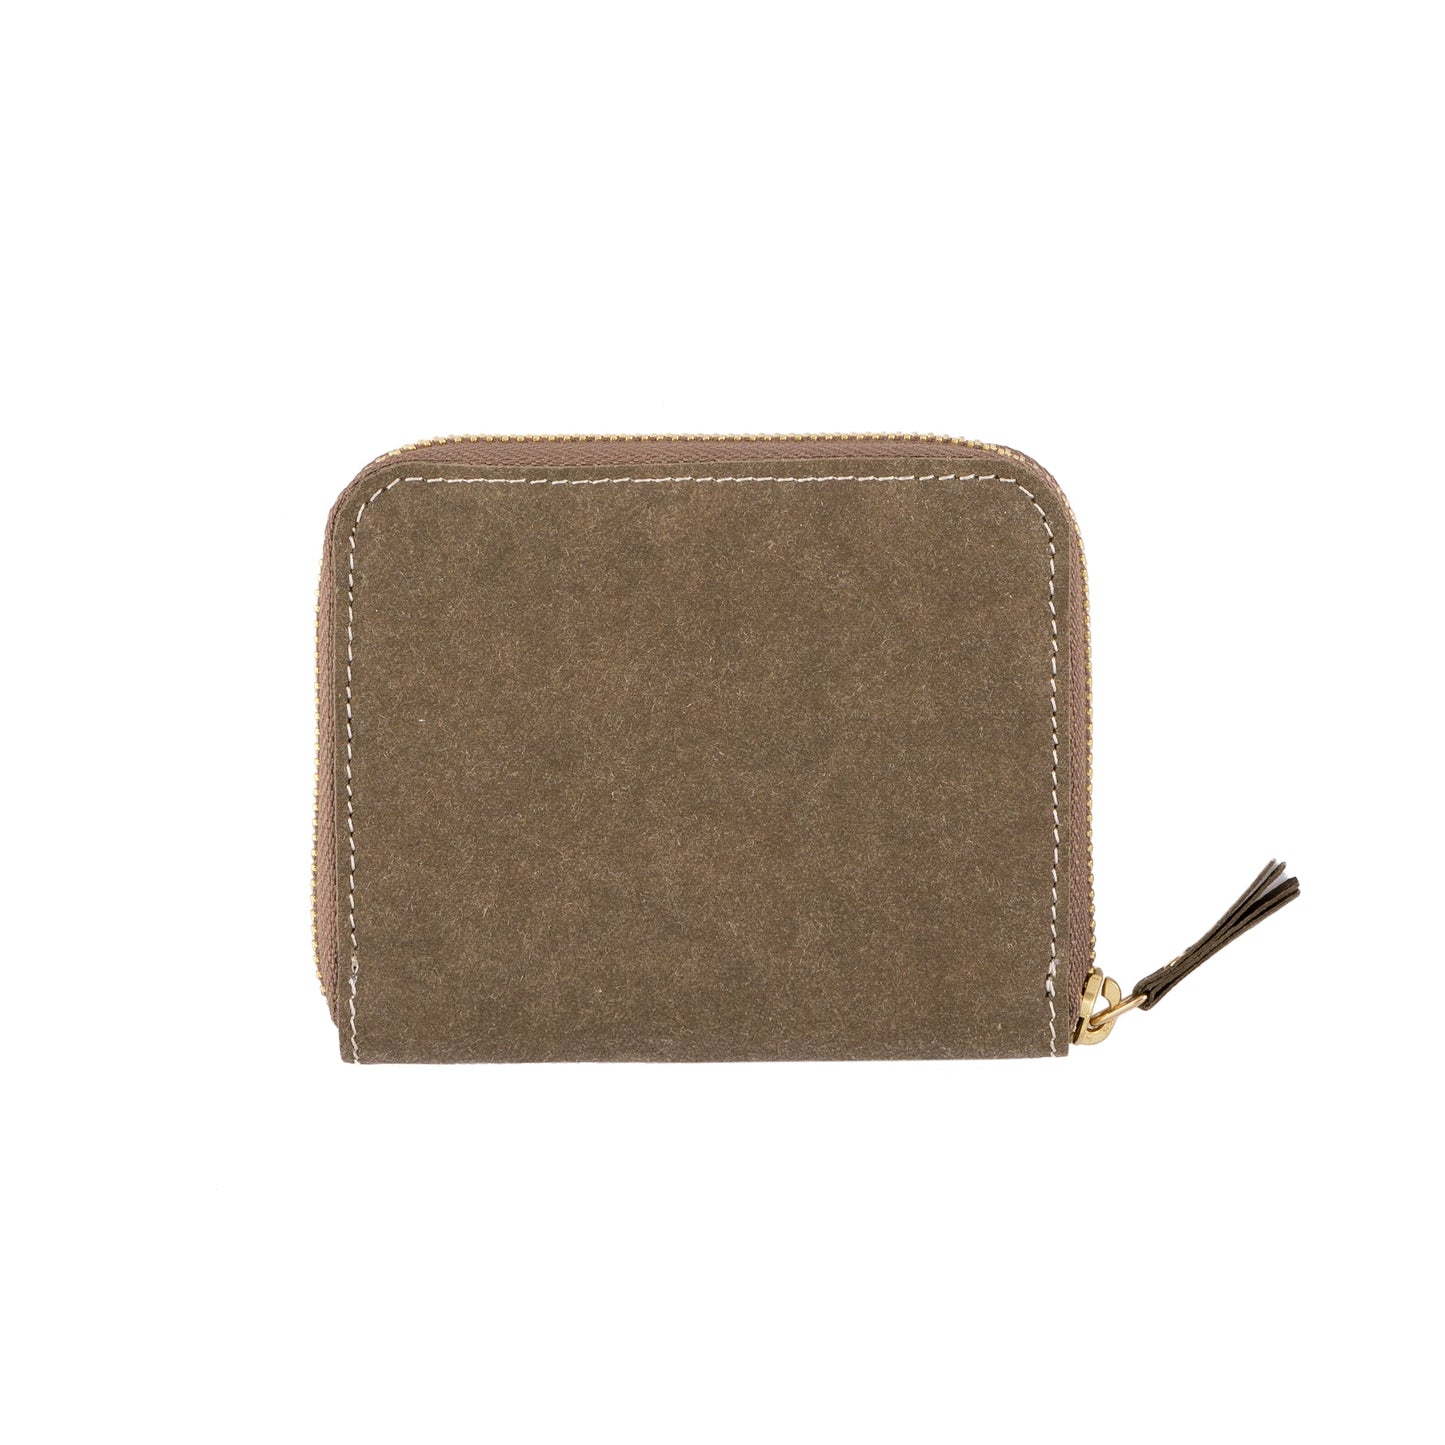 The outside of a small zippered washable paper wallet is shown. The image also shows a silver zip and washable paper zip pull. The wallet shown is olive.